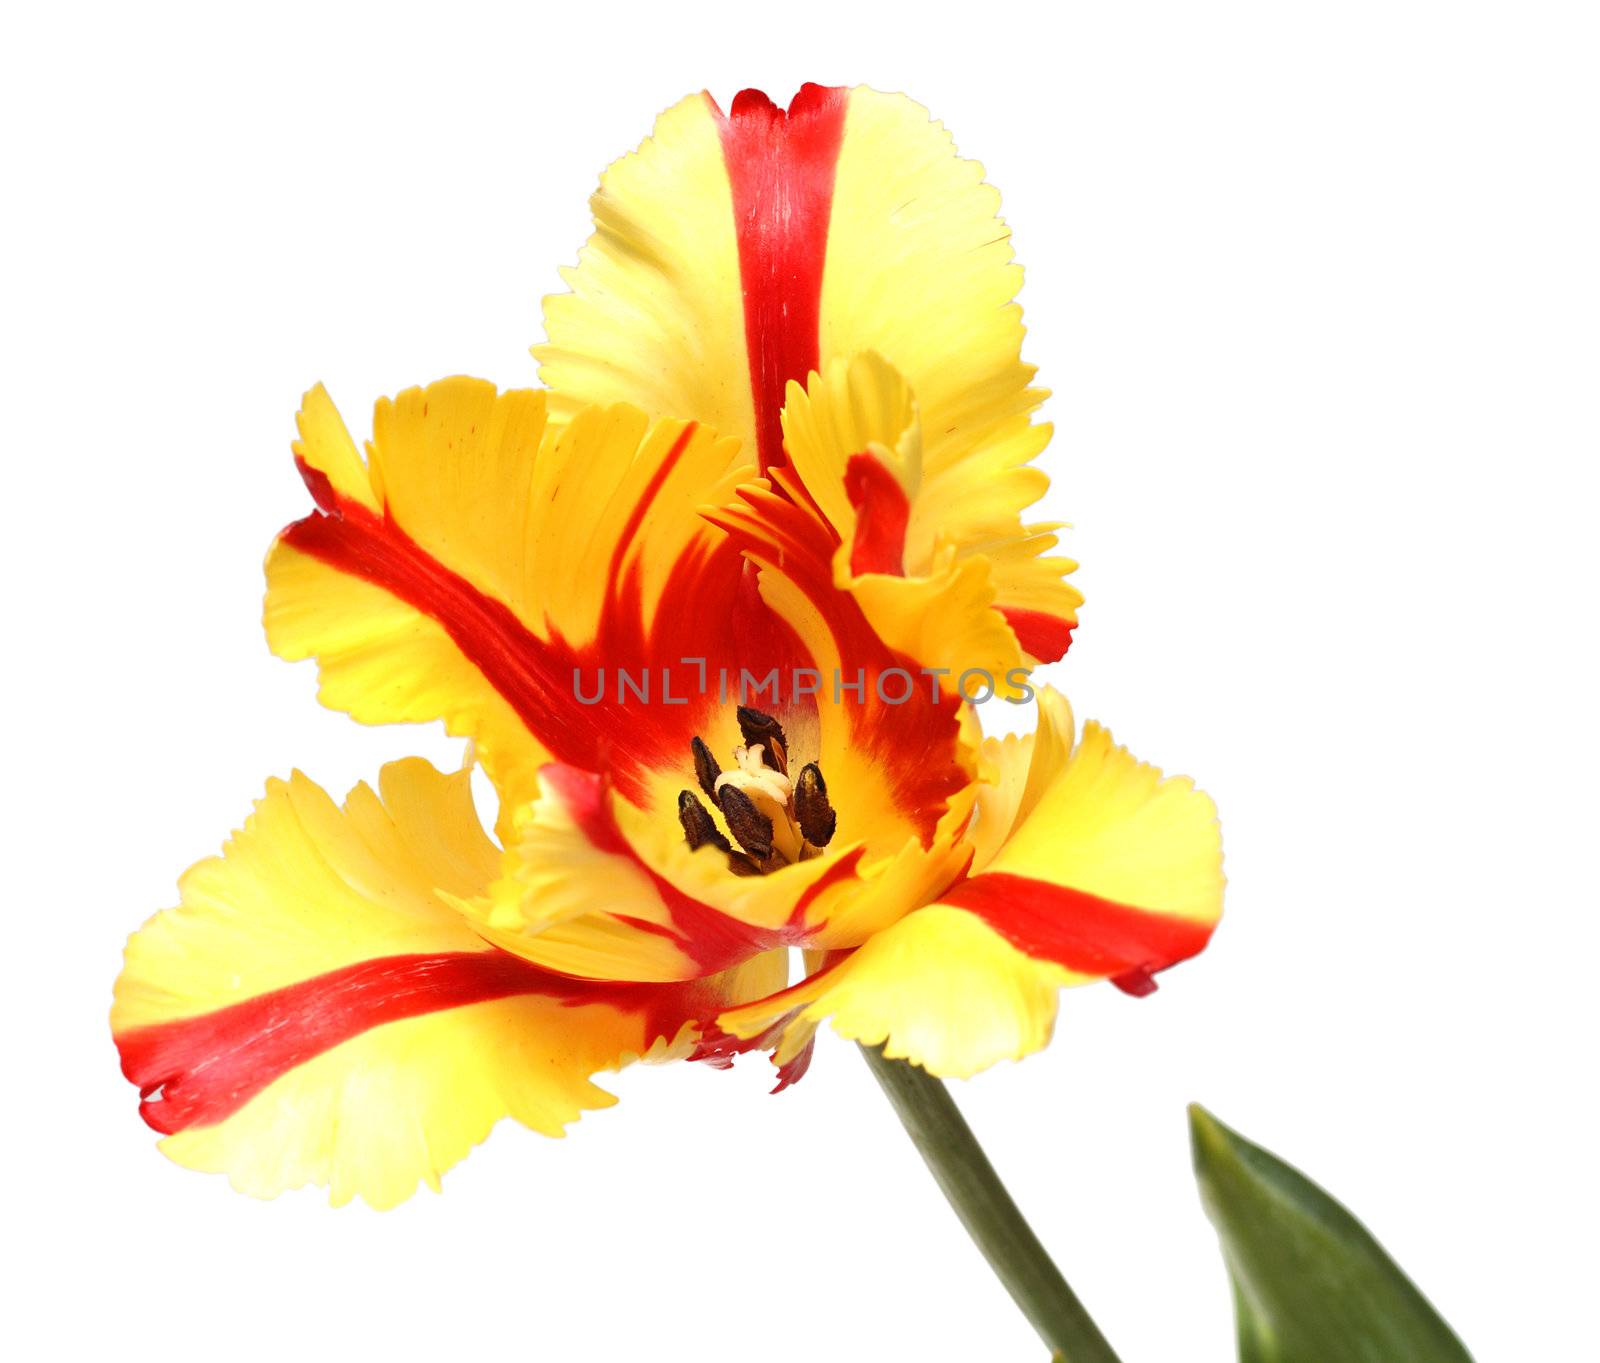 close-up view on red-yellow tulip by Mikko